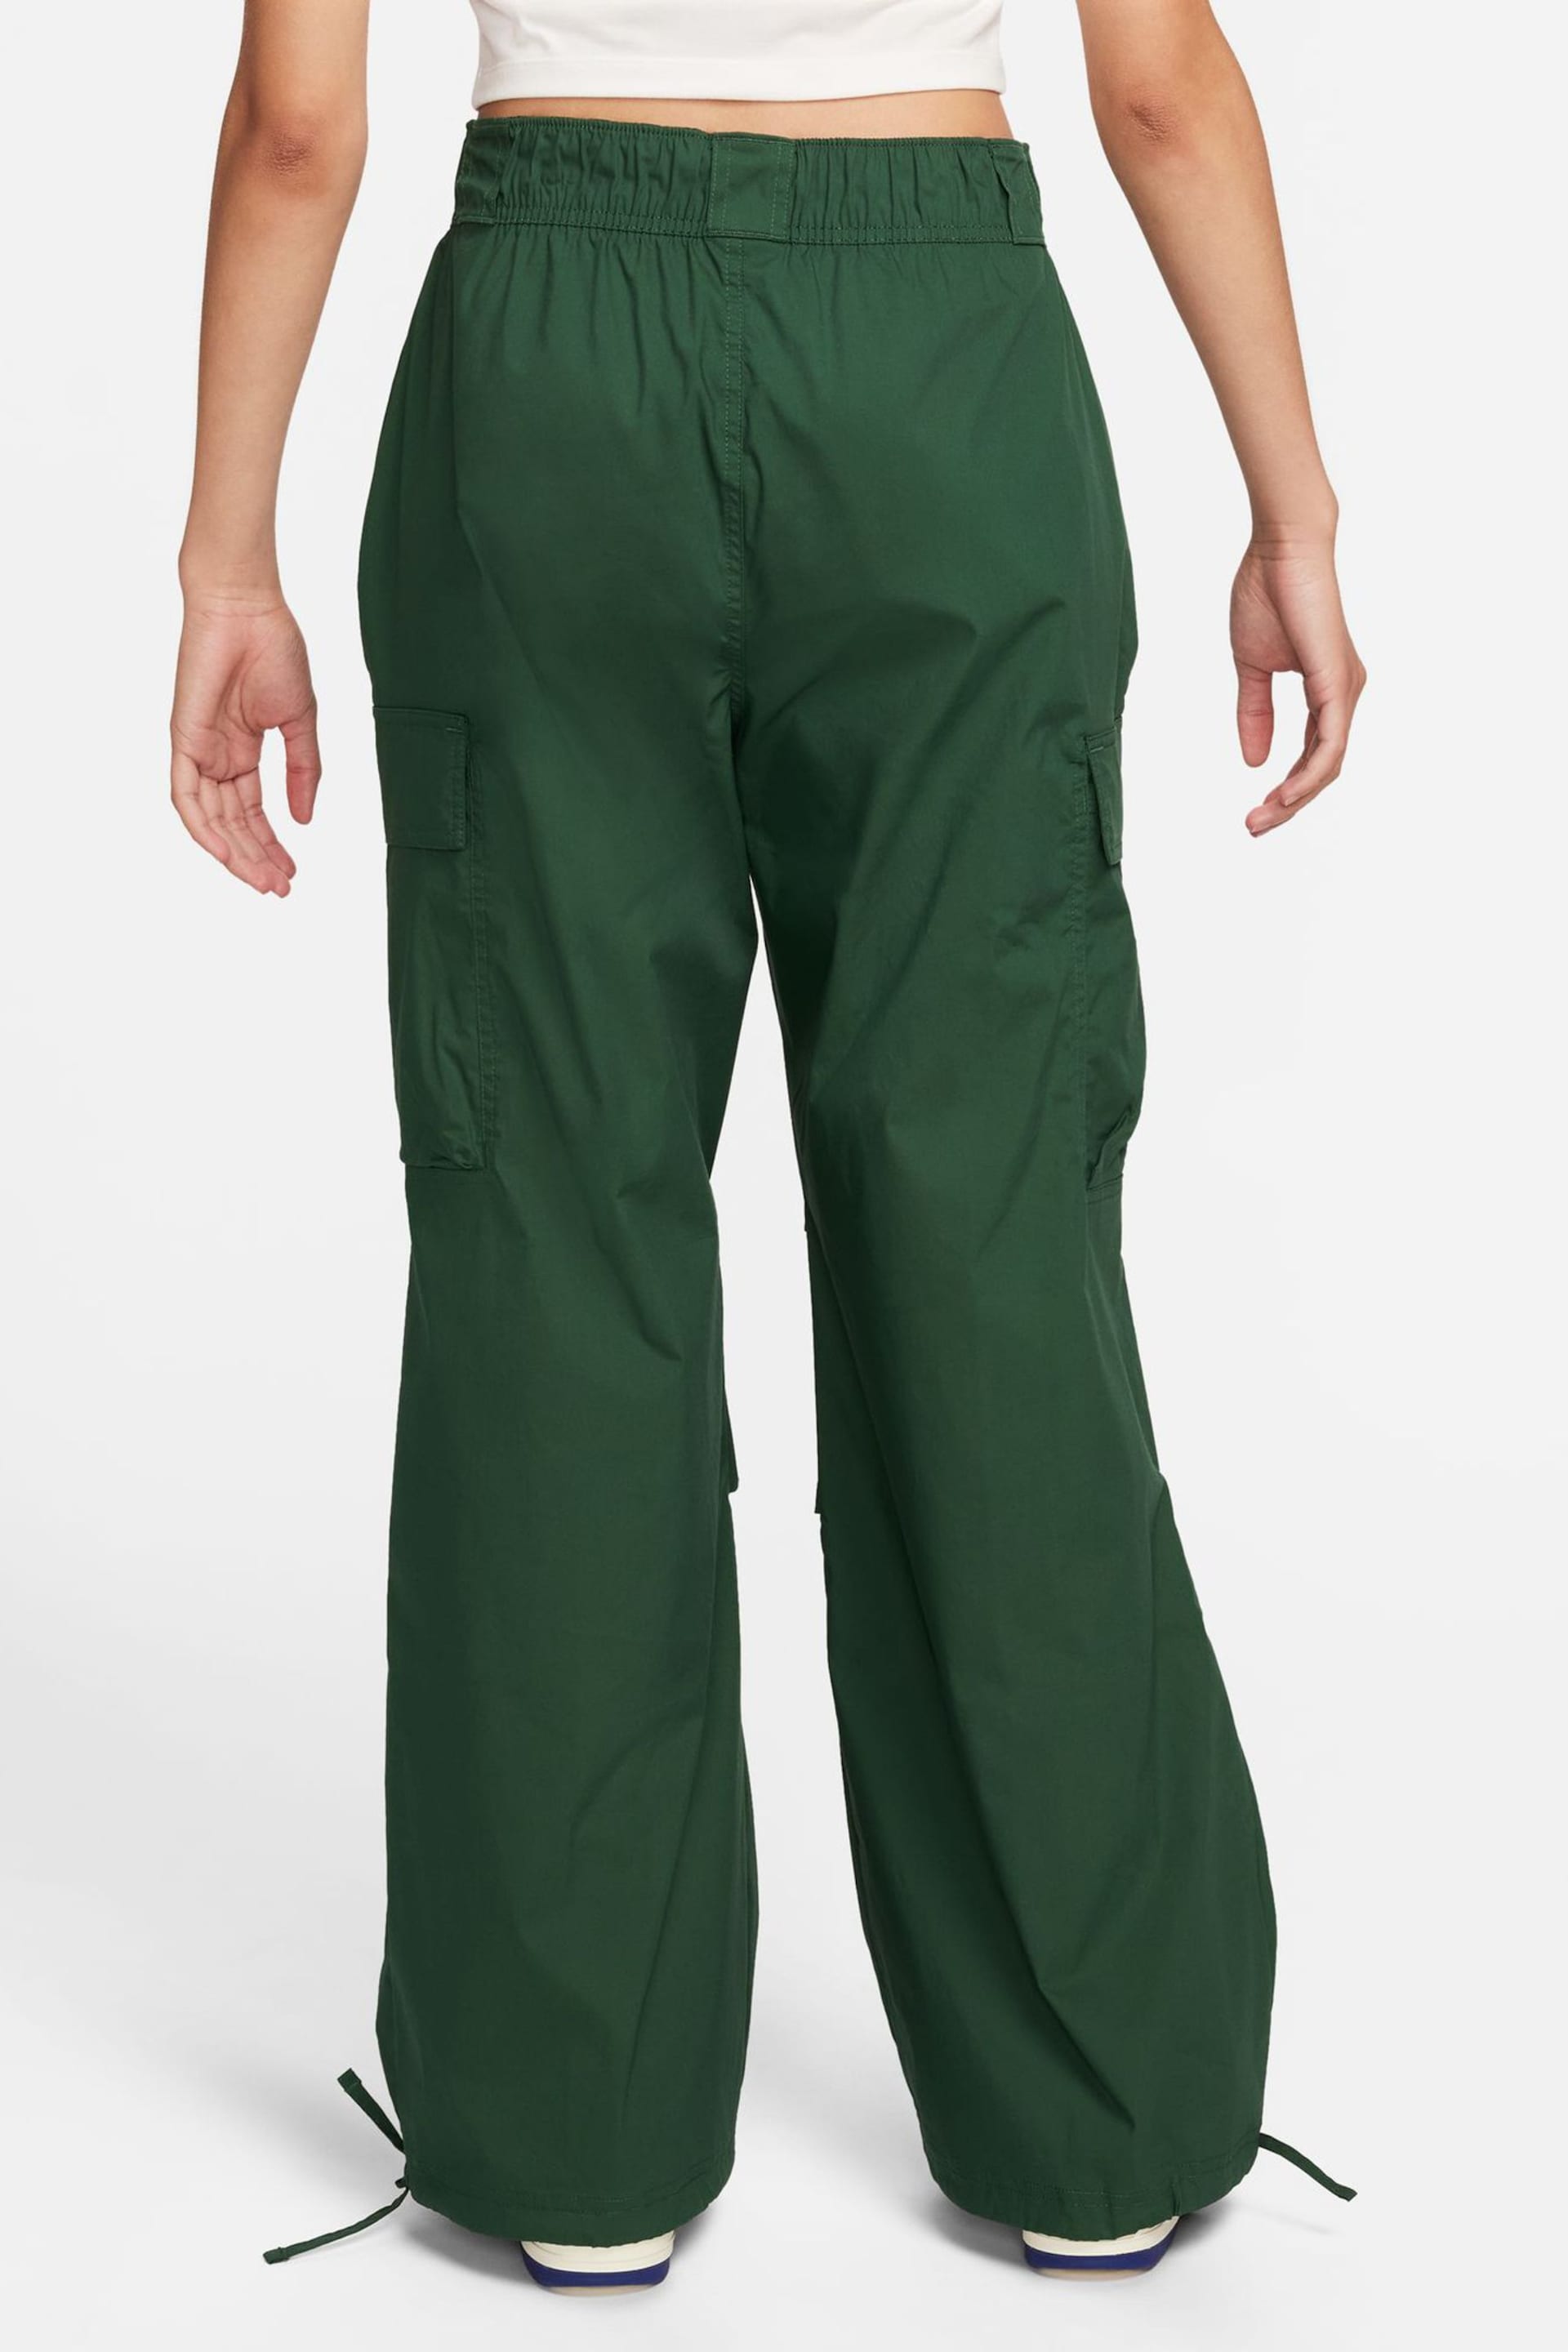 Nike Green High Rise Woven Oversized Trousers - Image 2 of 6